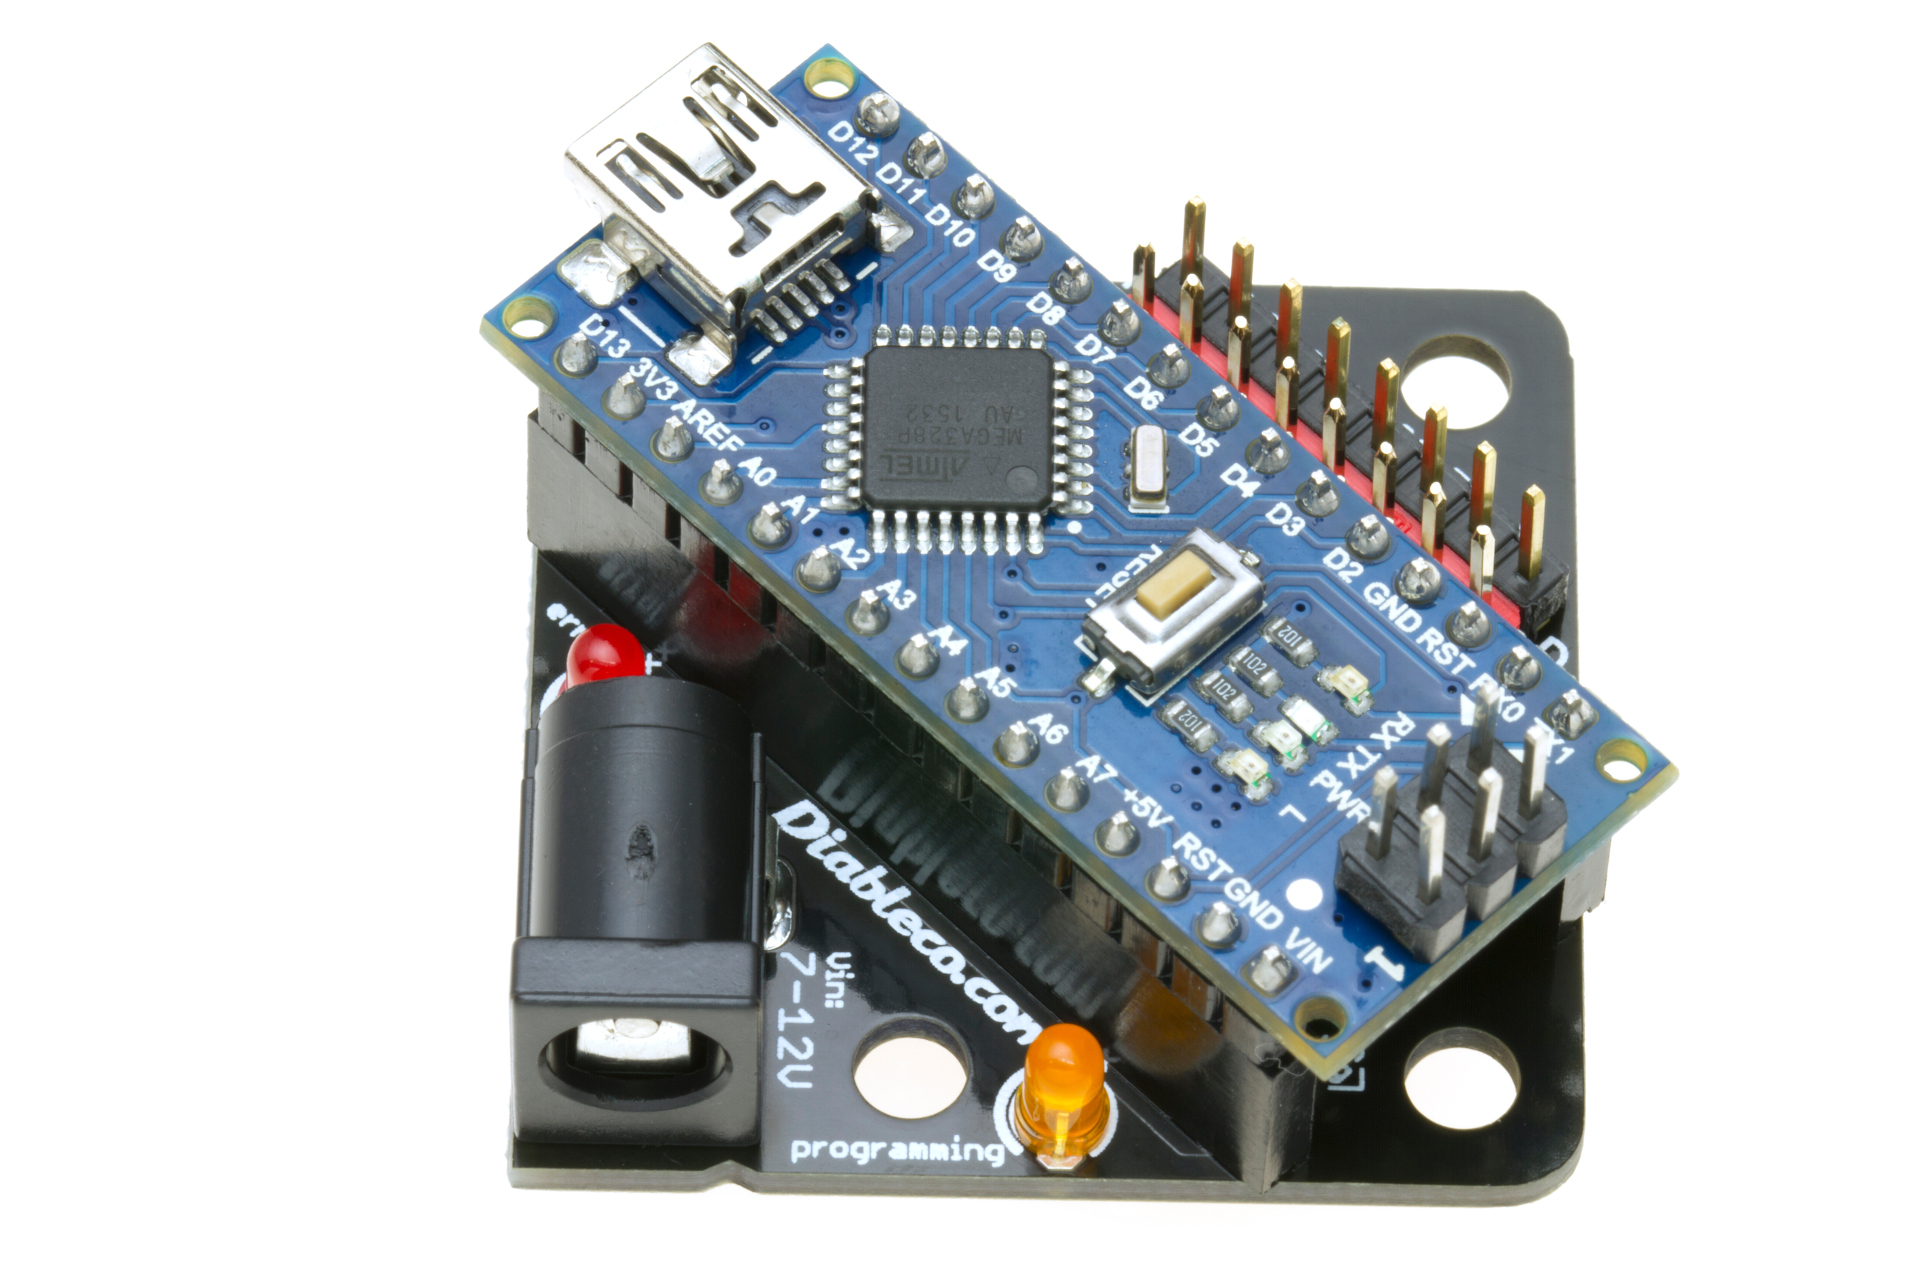 FuracosNano with Arduino connected